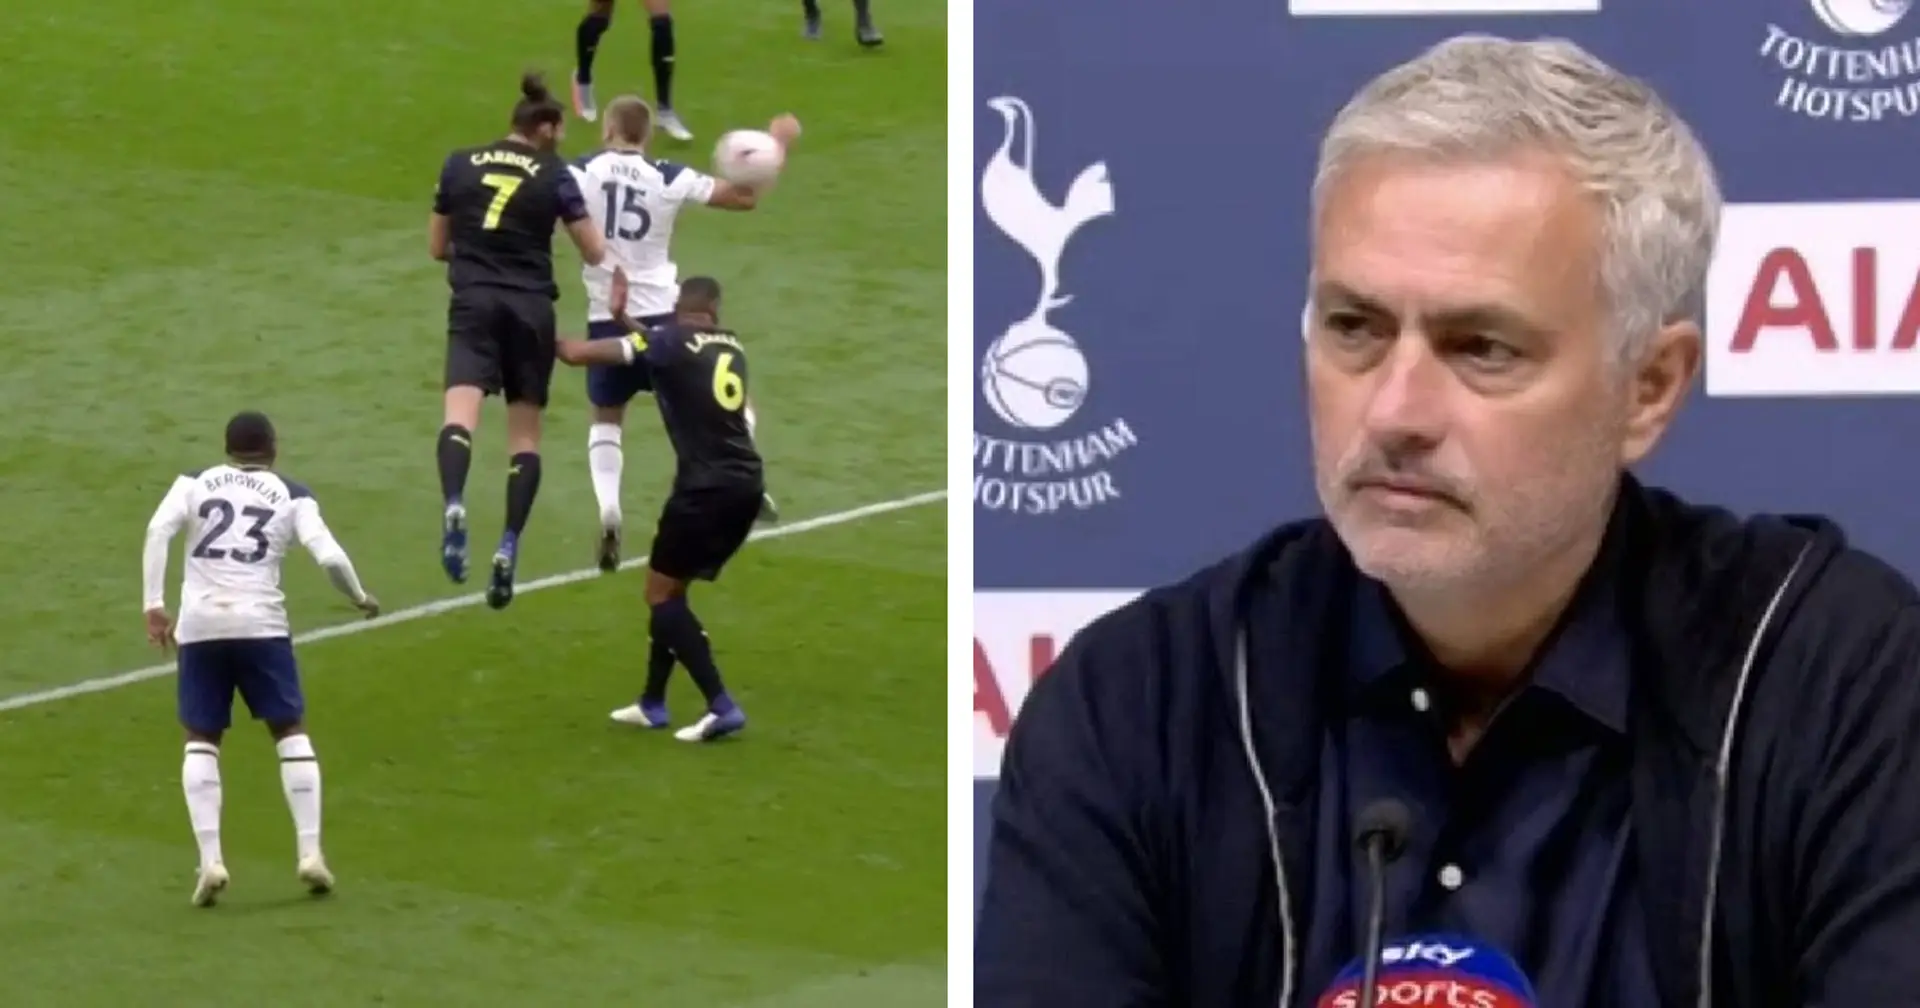 Mourinho: 'I realise now the difference between clubs with big history and others; Spurs' trophy history is not as big'